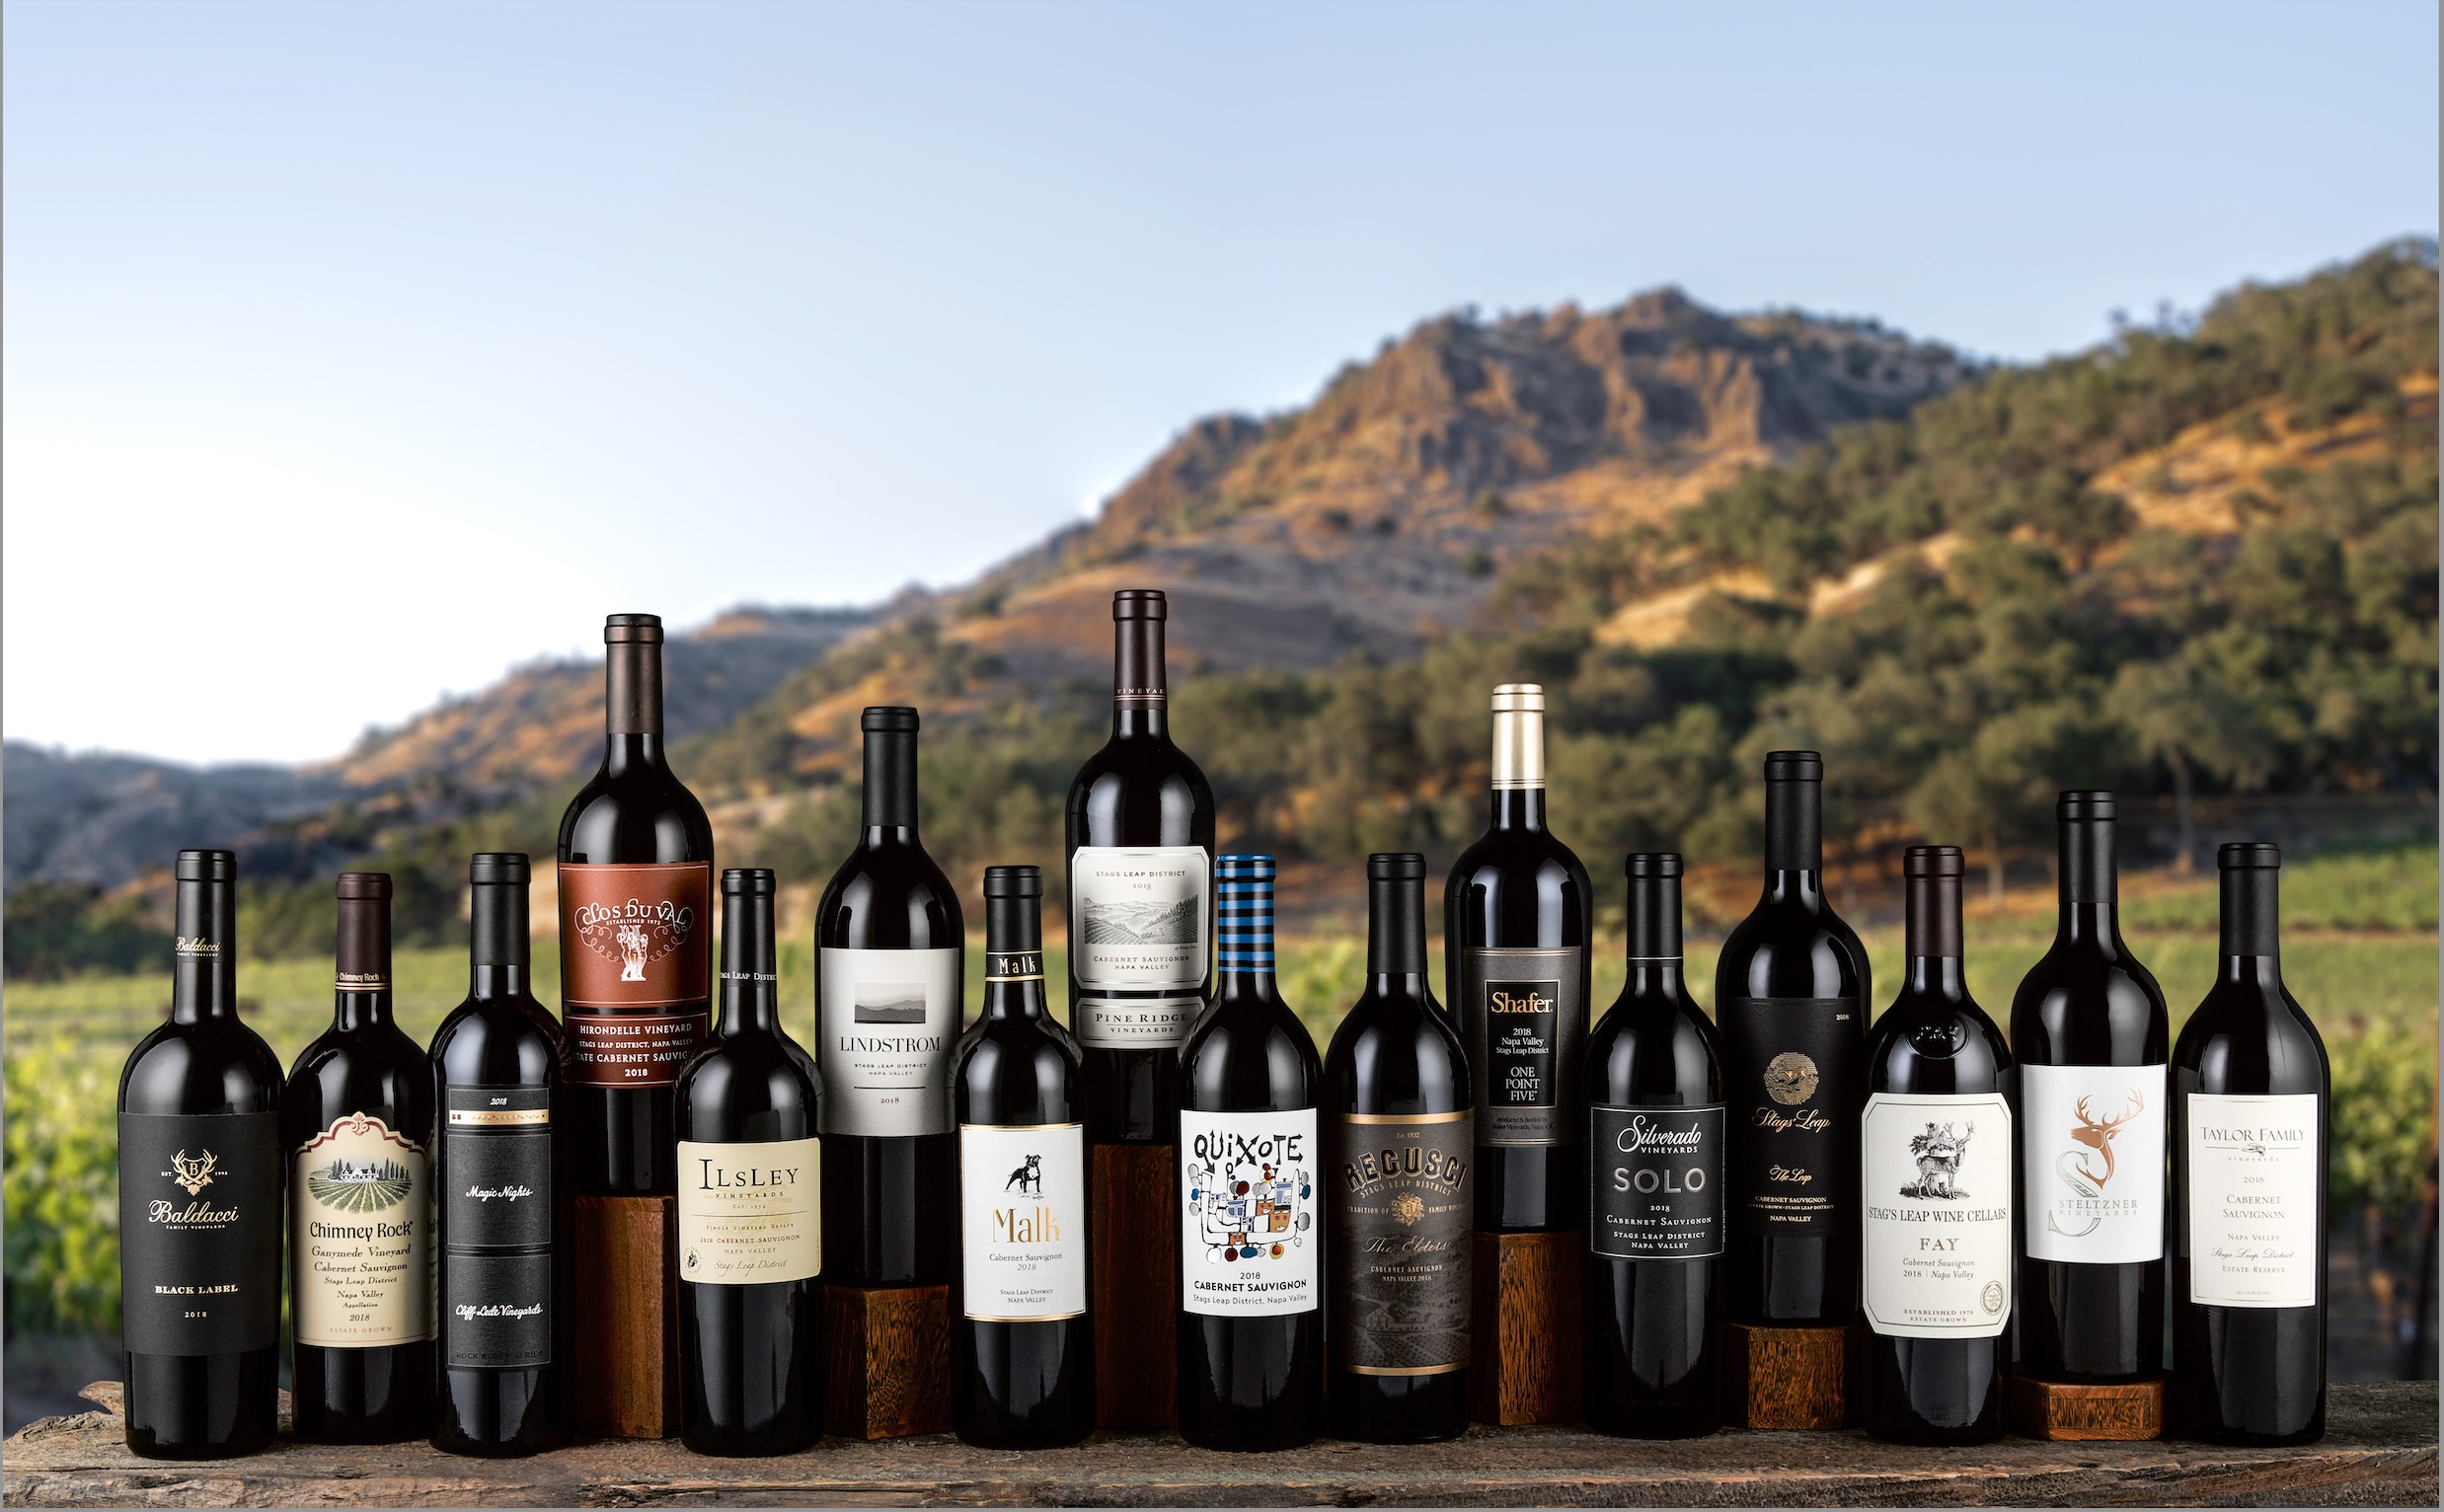 Each bottle offers the chance to explore the region sip by sip, and together the collection presents a snapshot the 2018 growing season and deep insight into the Stags Leap District.